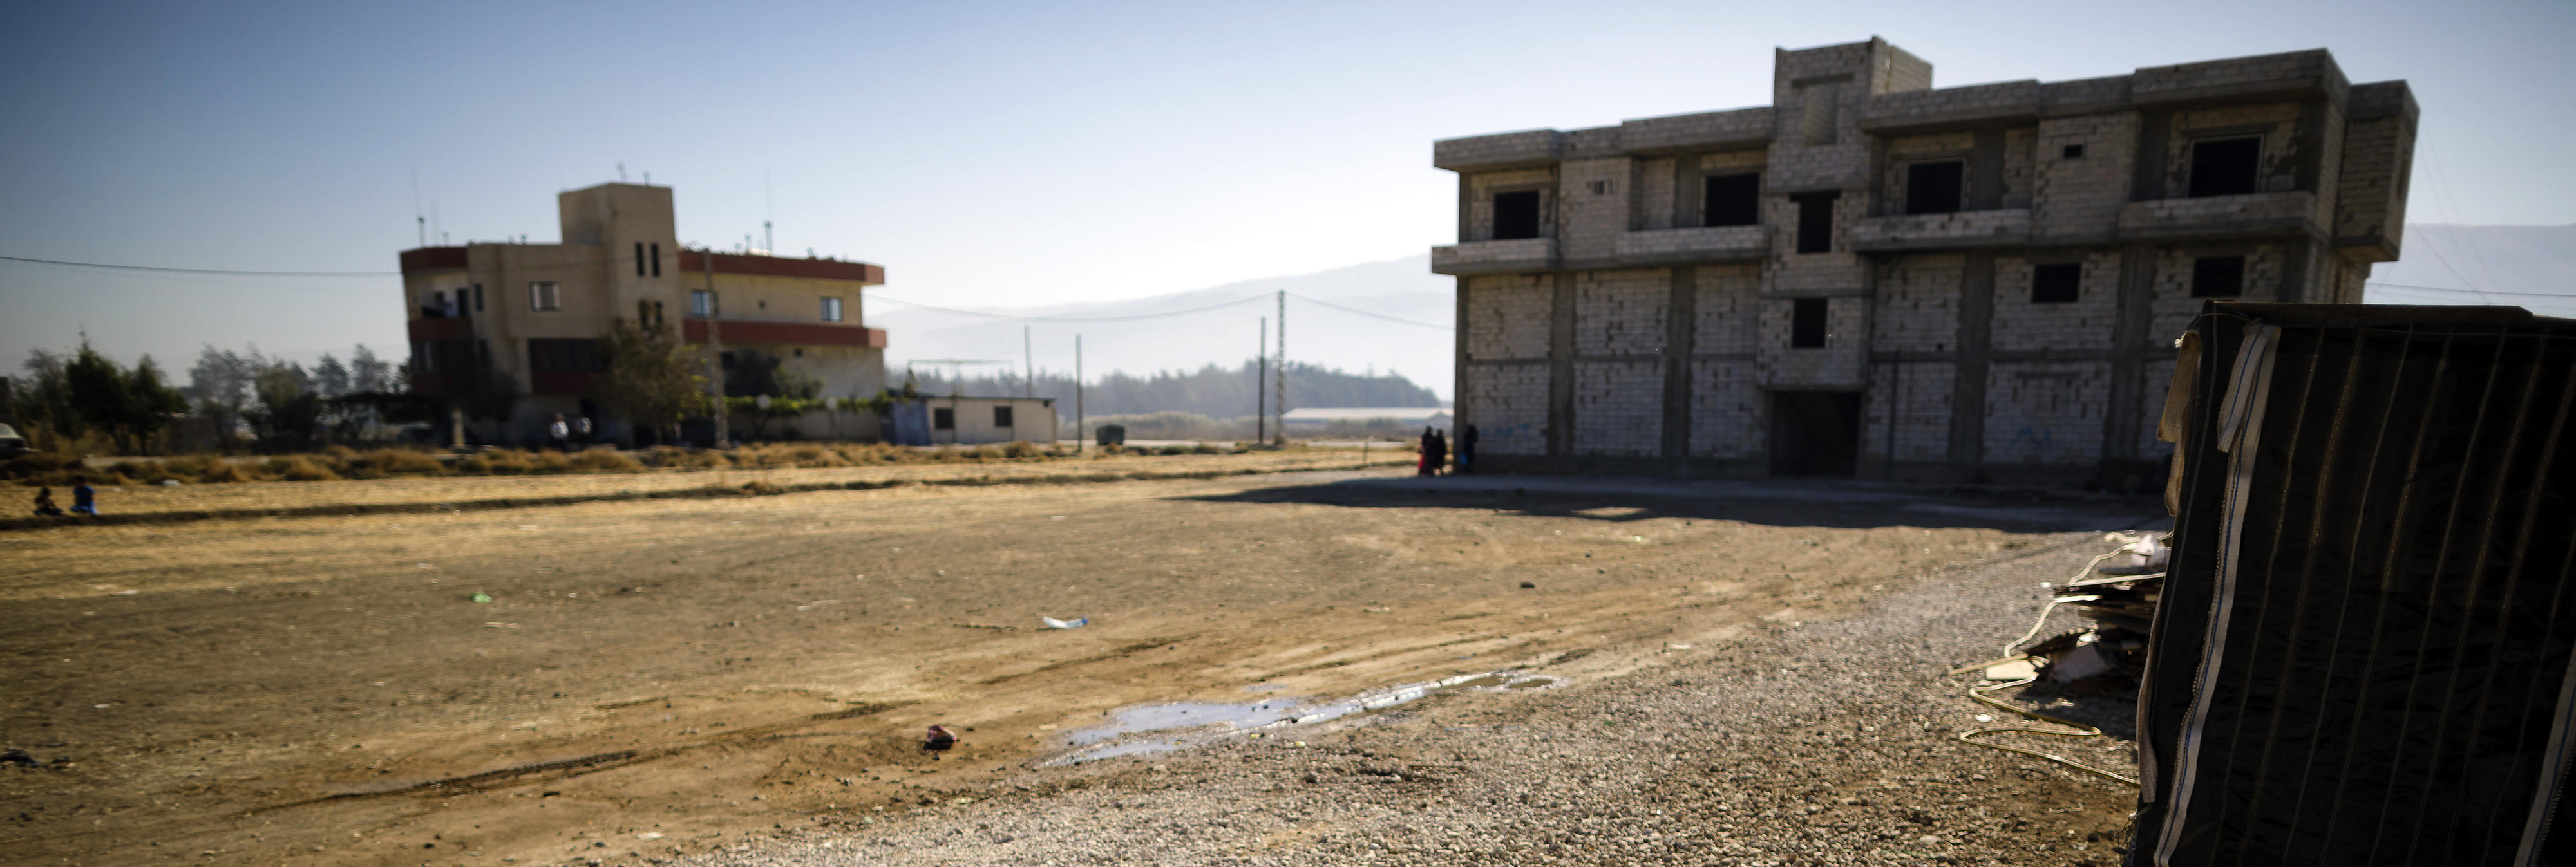 Camp for refugees in the Bekaa Valley, Lebanon